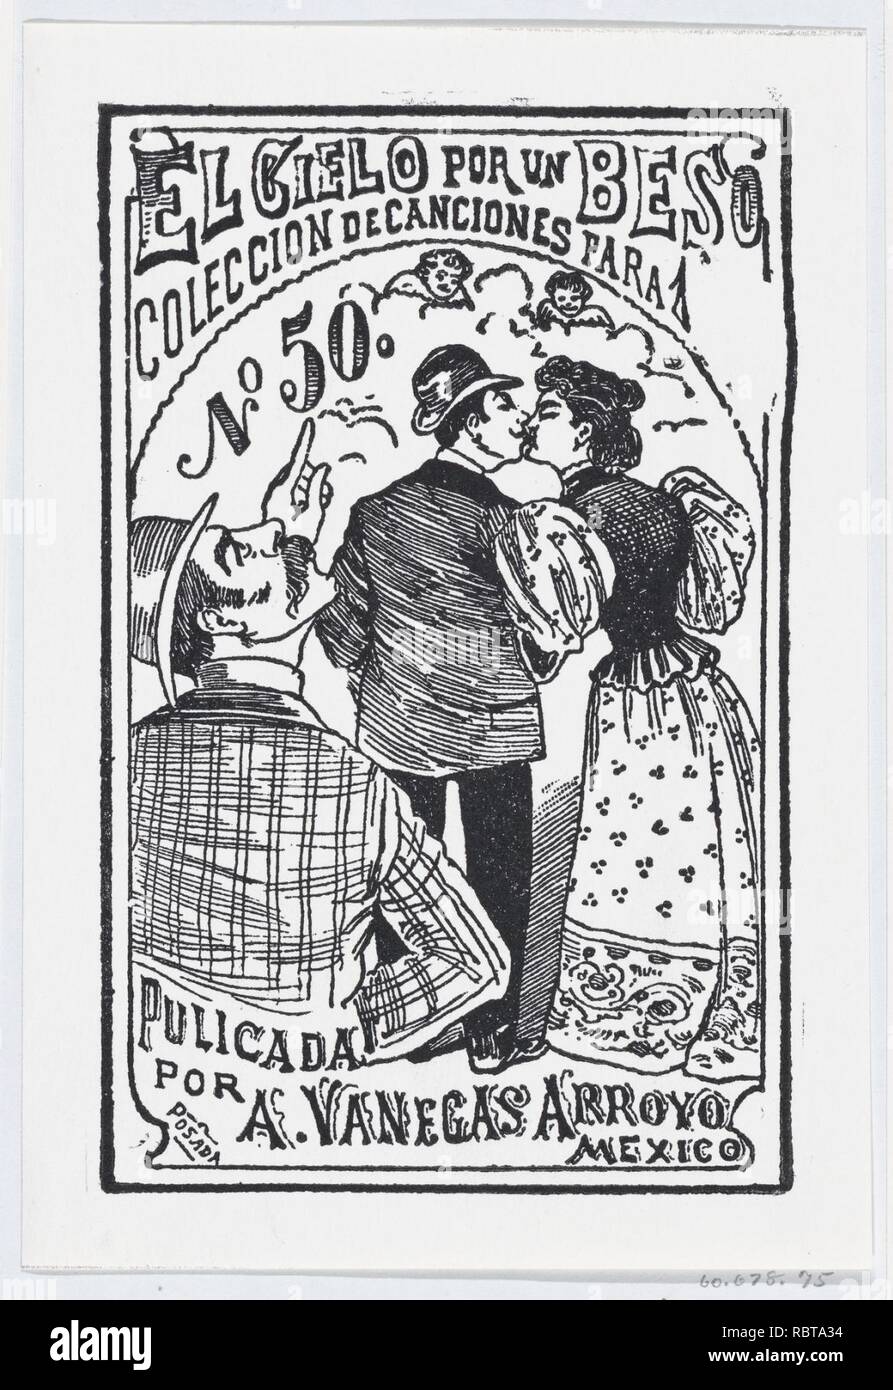 A man pointing to the heavens while a couple kisses in the background, illustration for ' El Cielo por un Beso,' published by Antonio Vanegas Arroyo Stock Photo